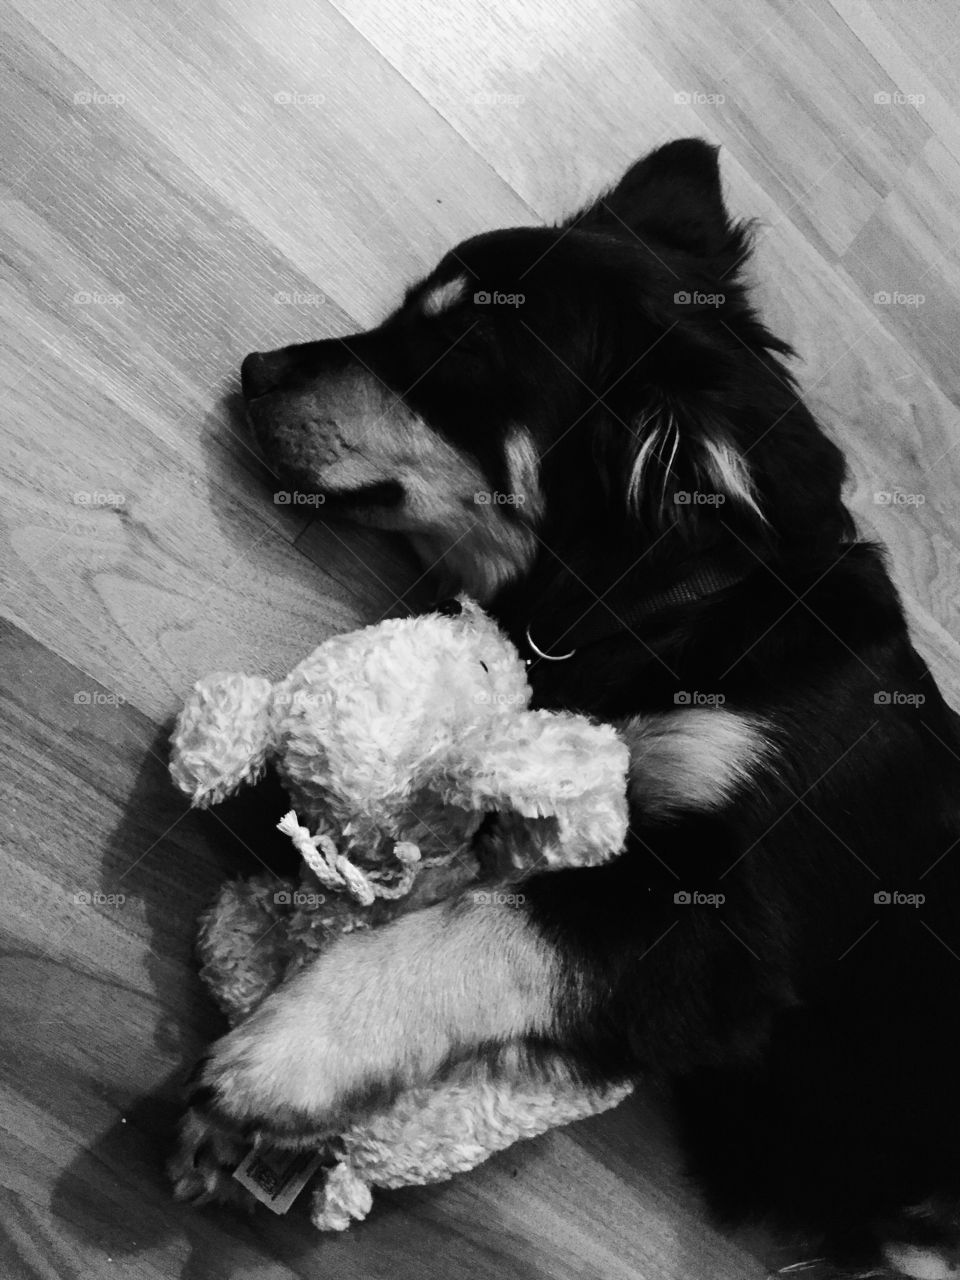 Exhausted puppy with stuffed animal